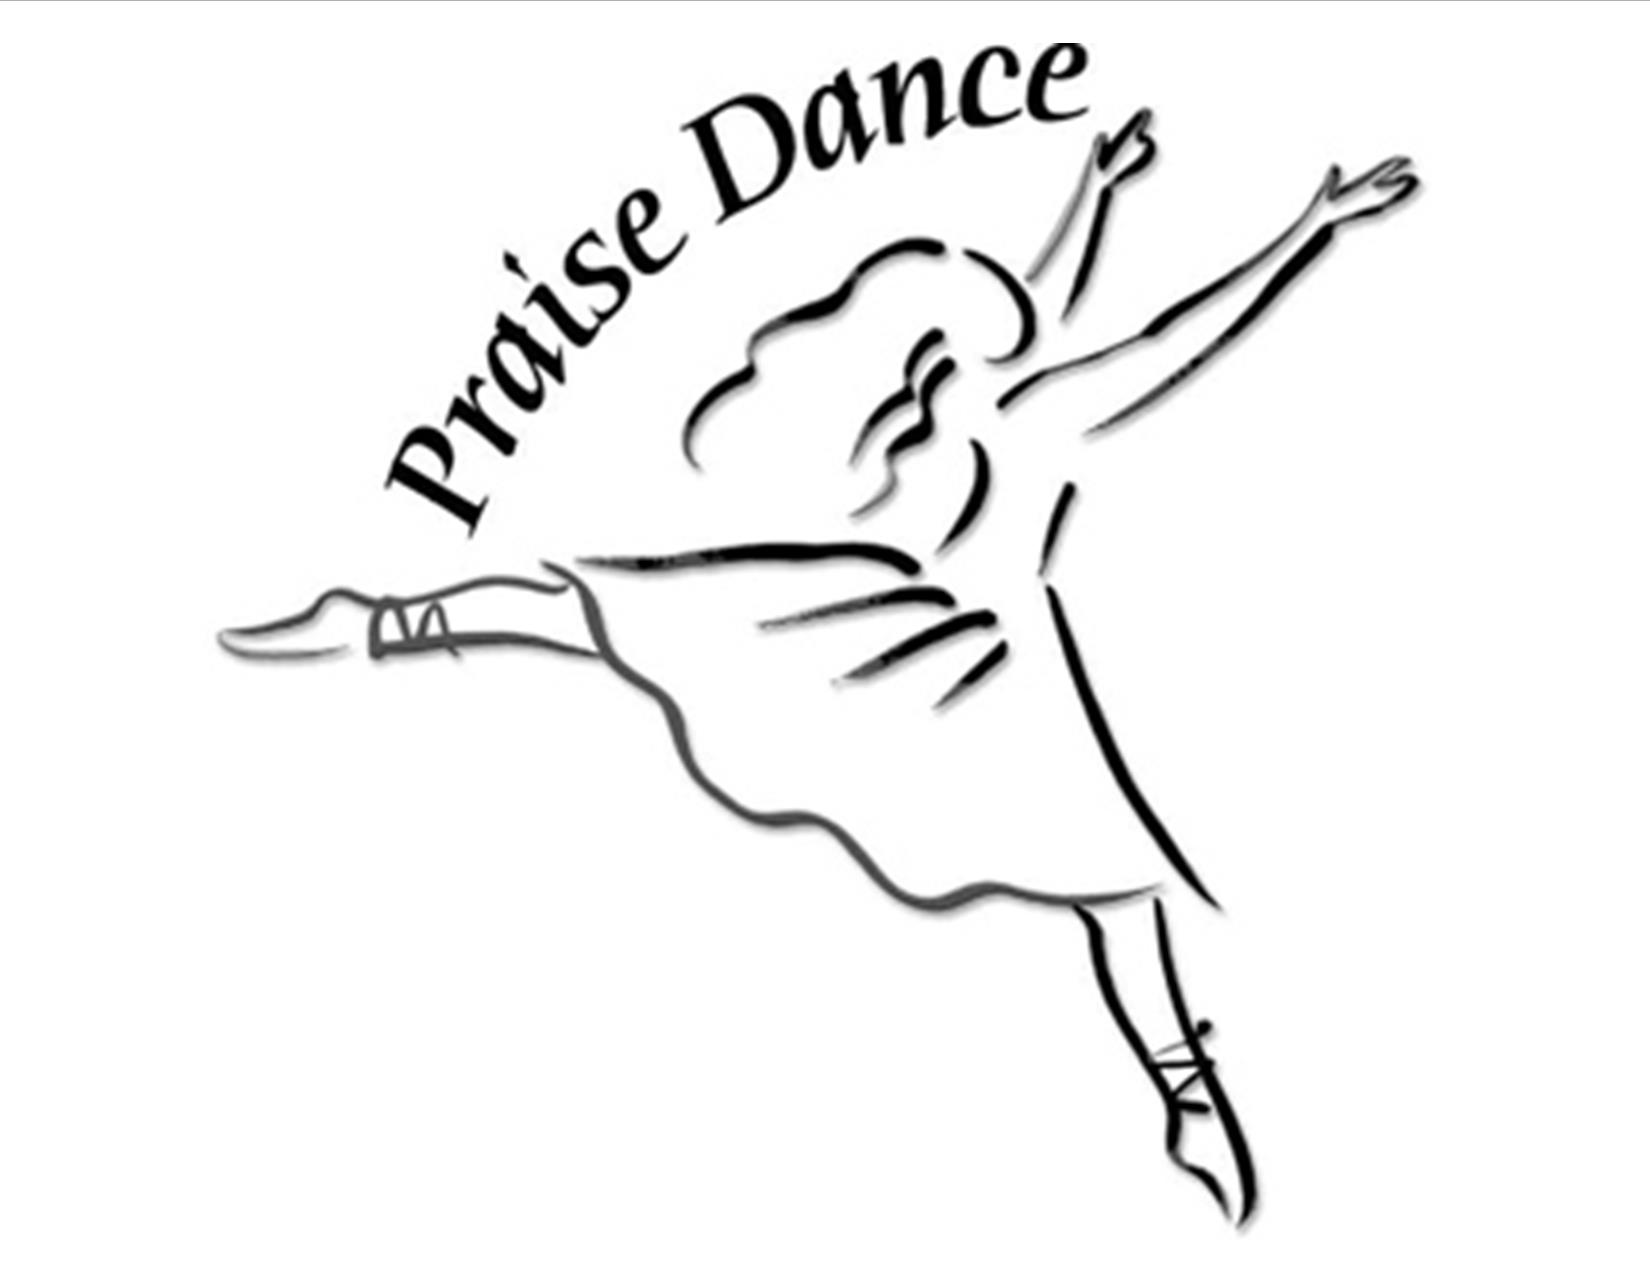 Free Worship Dance Cliparts, Download Free Clip Art, Free.